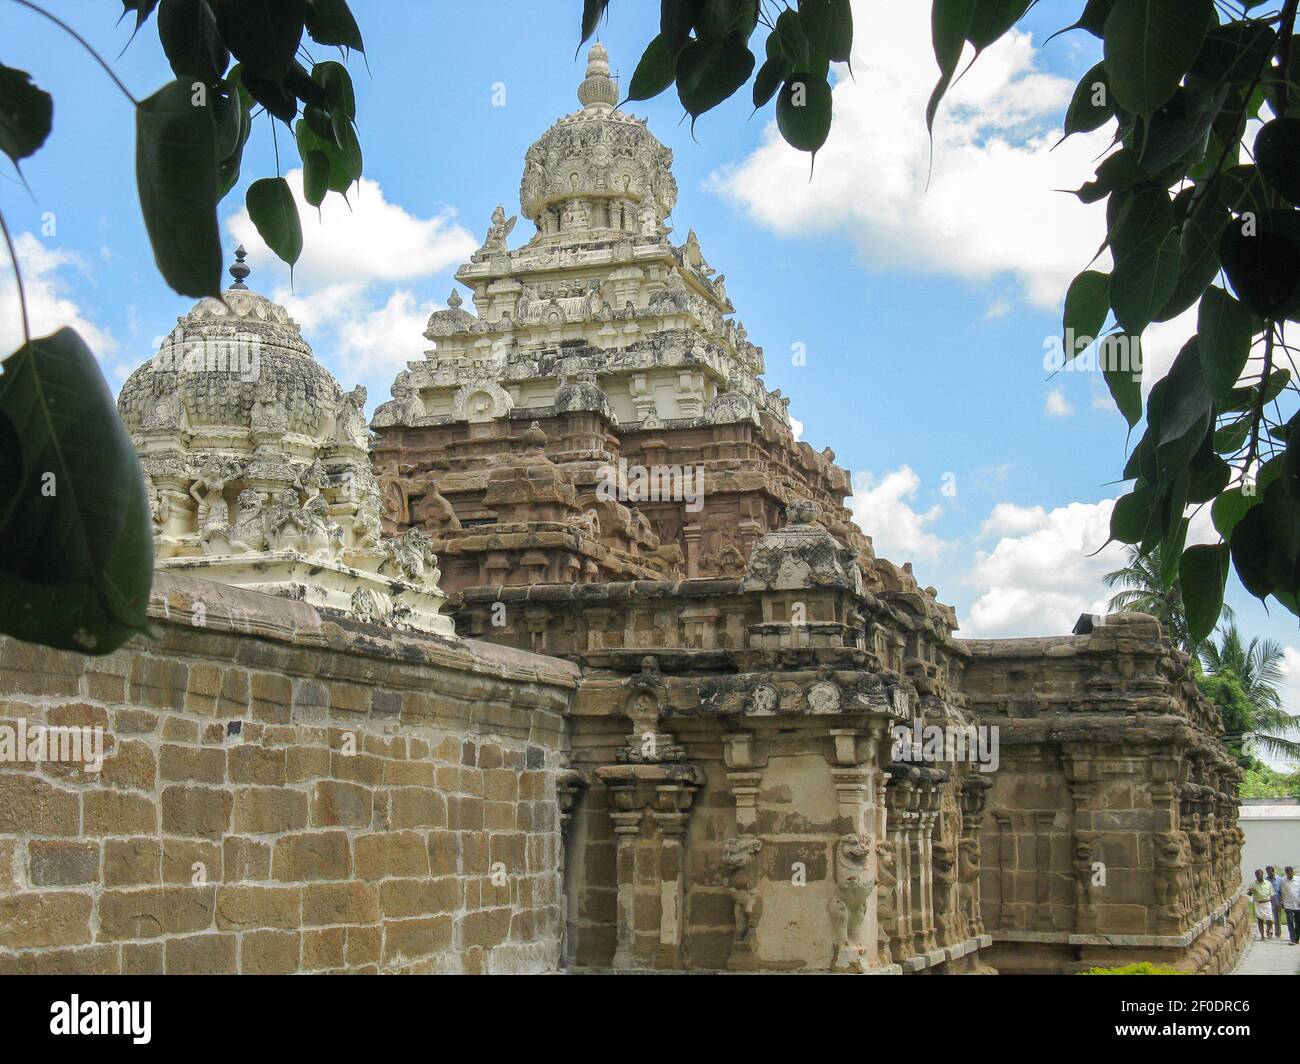 A temple of Indian Gods in South India at Kanchipuram In Tamil Nadu India clicked on 5 October 2008 Stock Photo